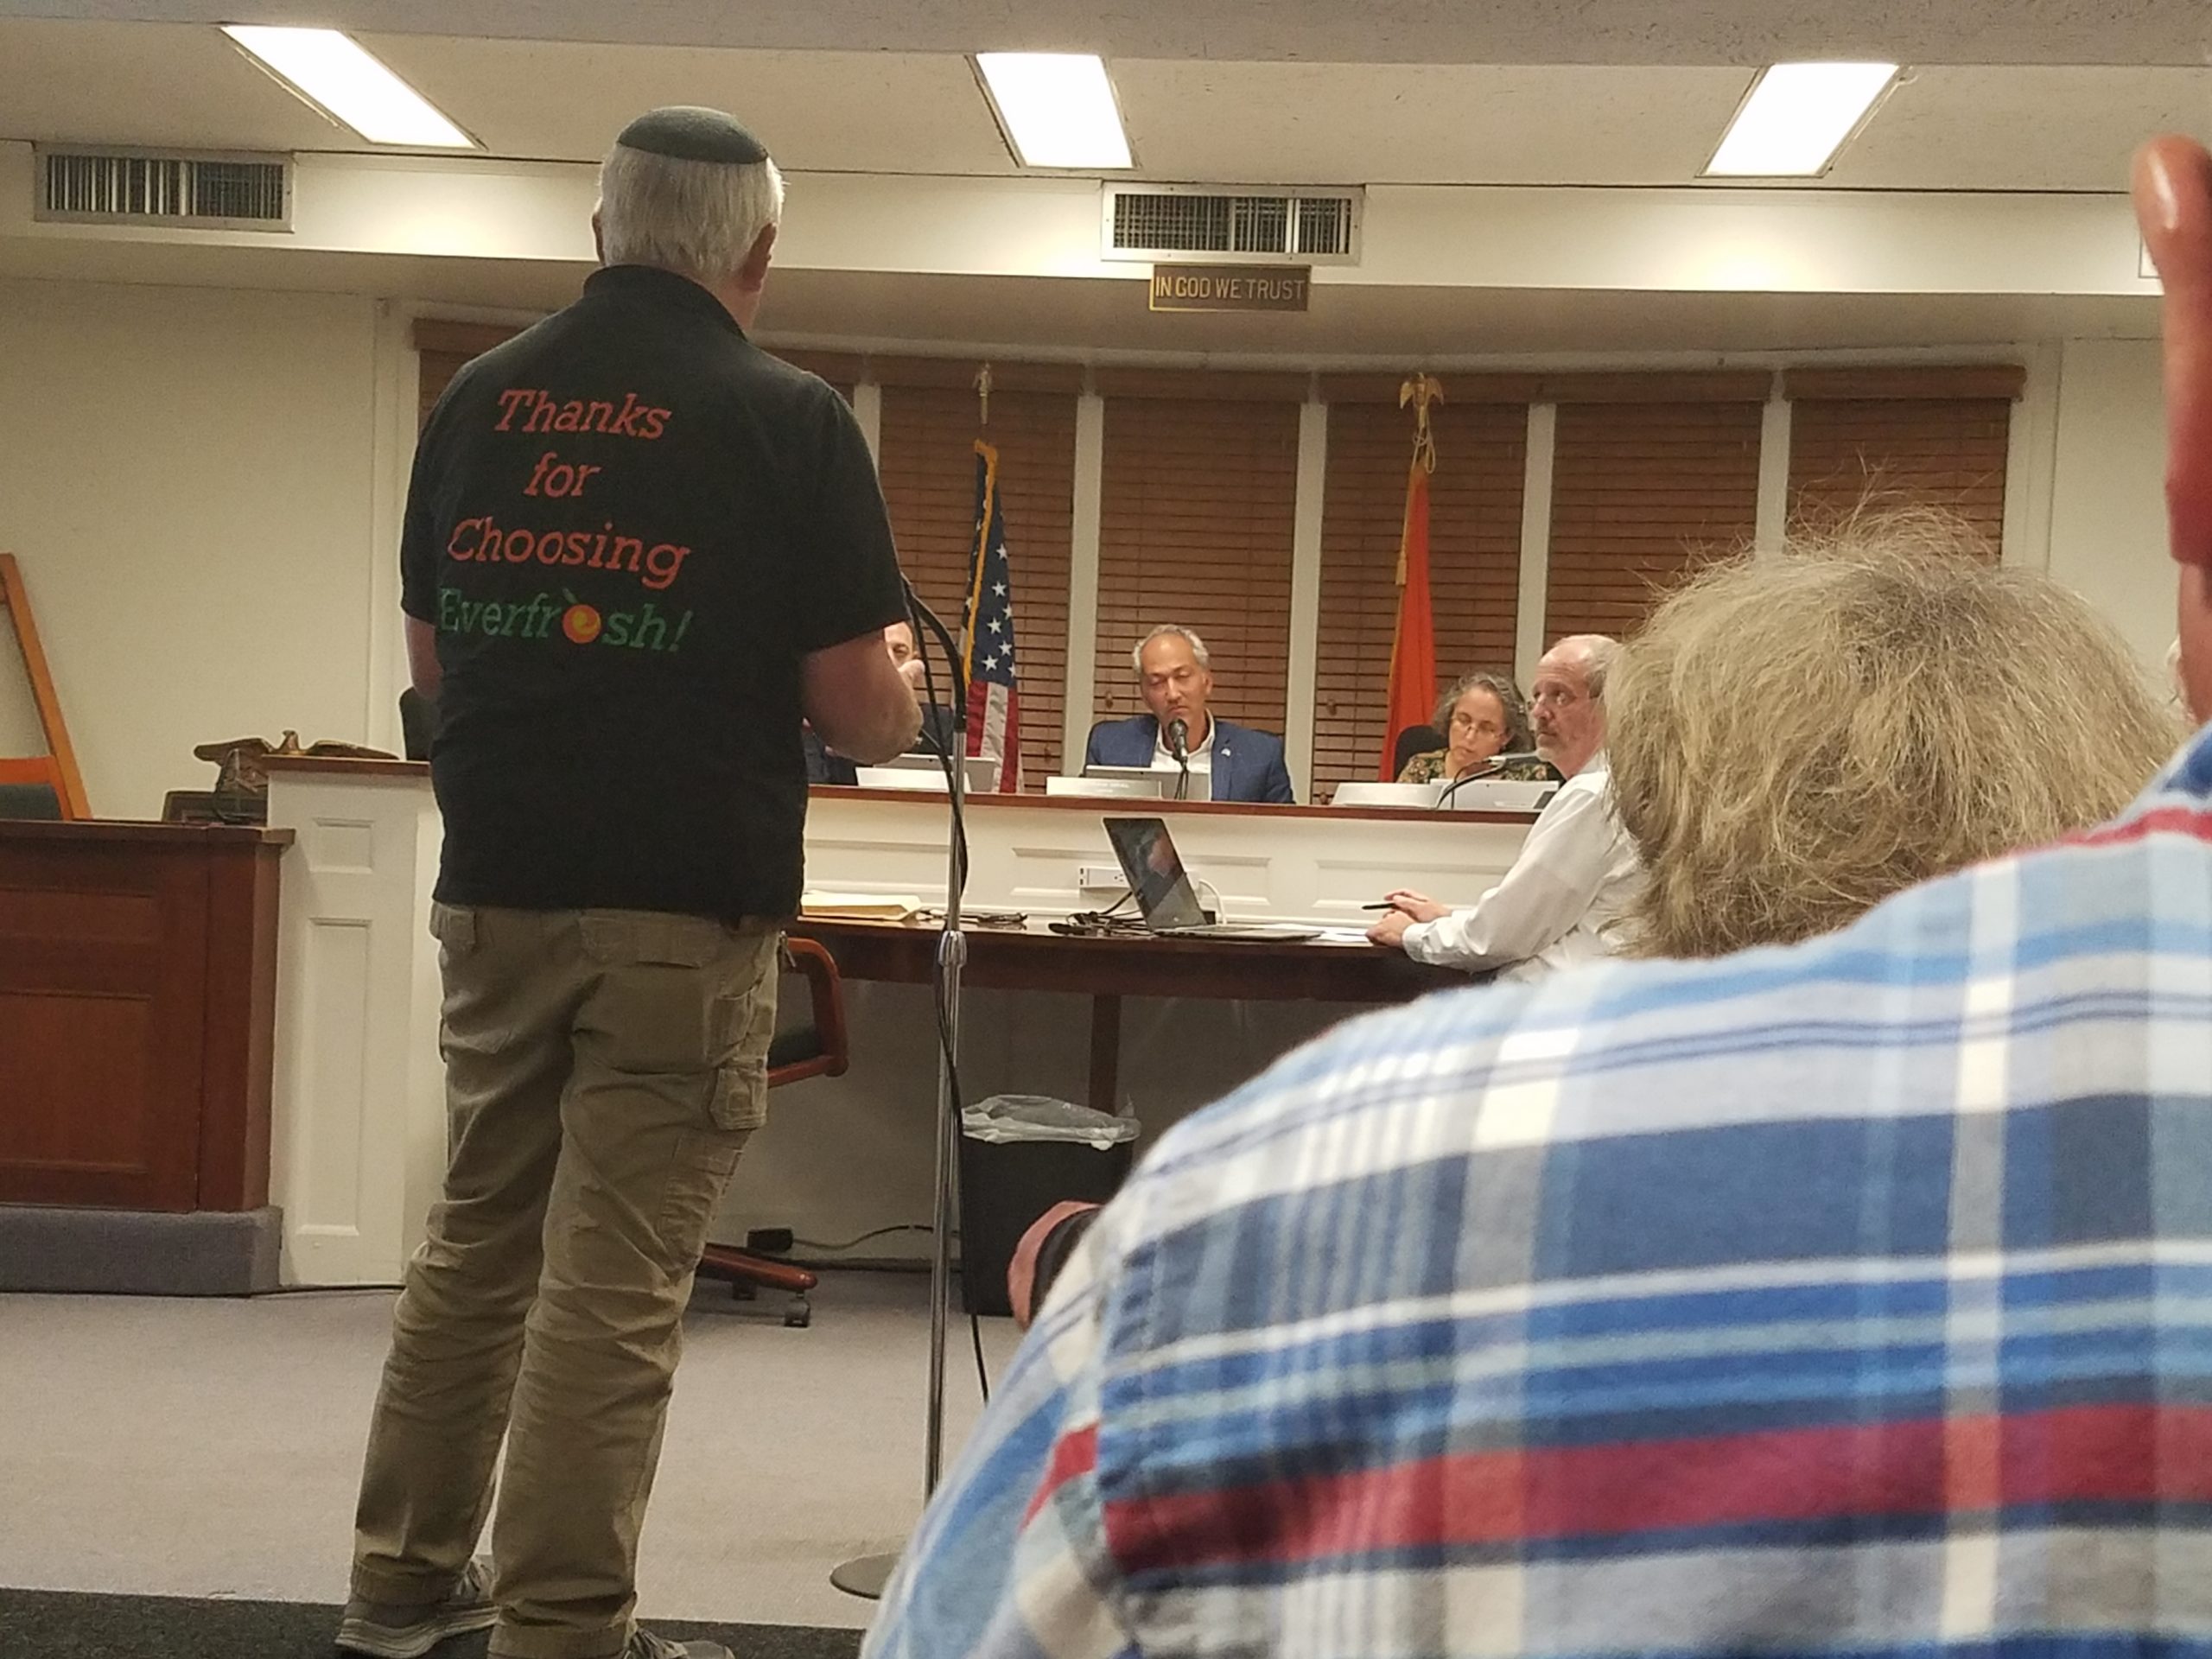 Howard Hassan of Everfresh addresses the Board of Trustees in the Village of Great Neck. (Photo by Janelle Clausen)